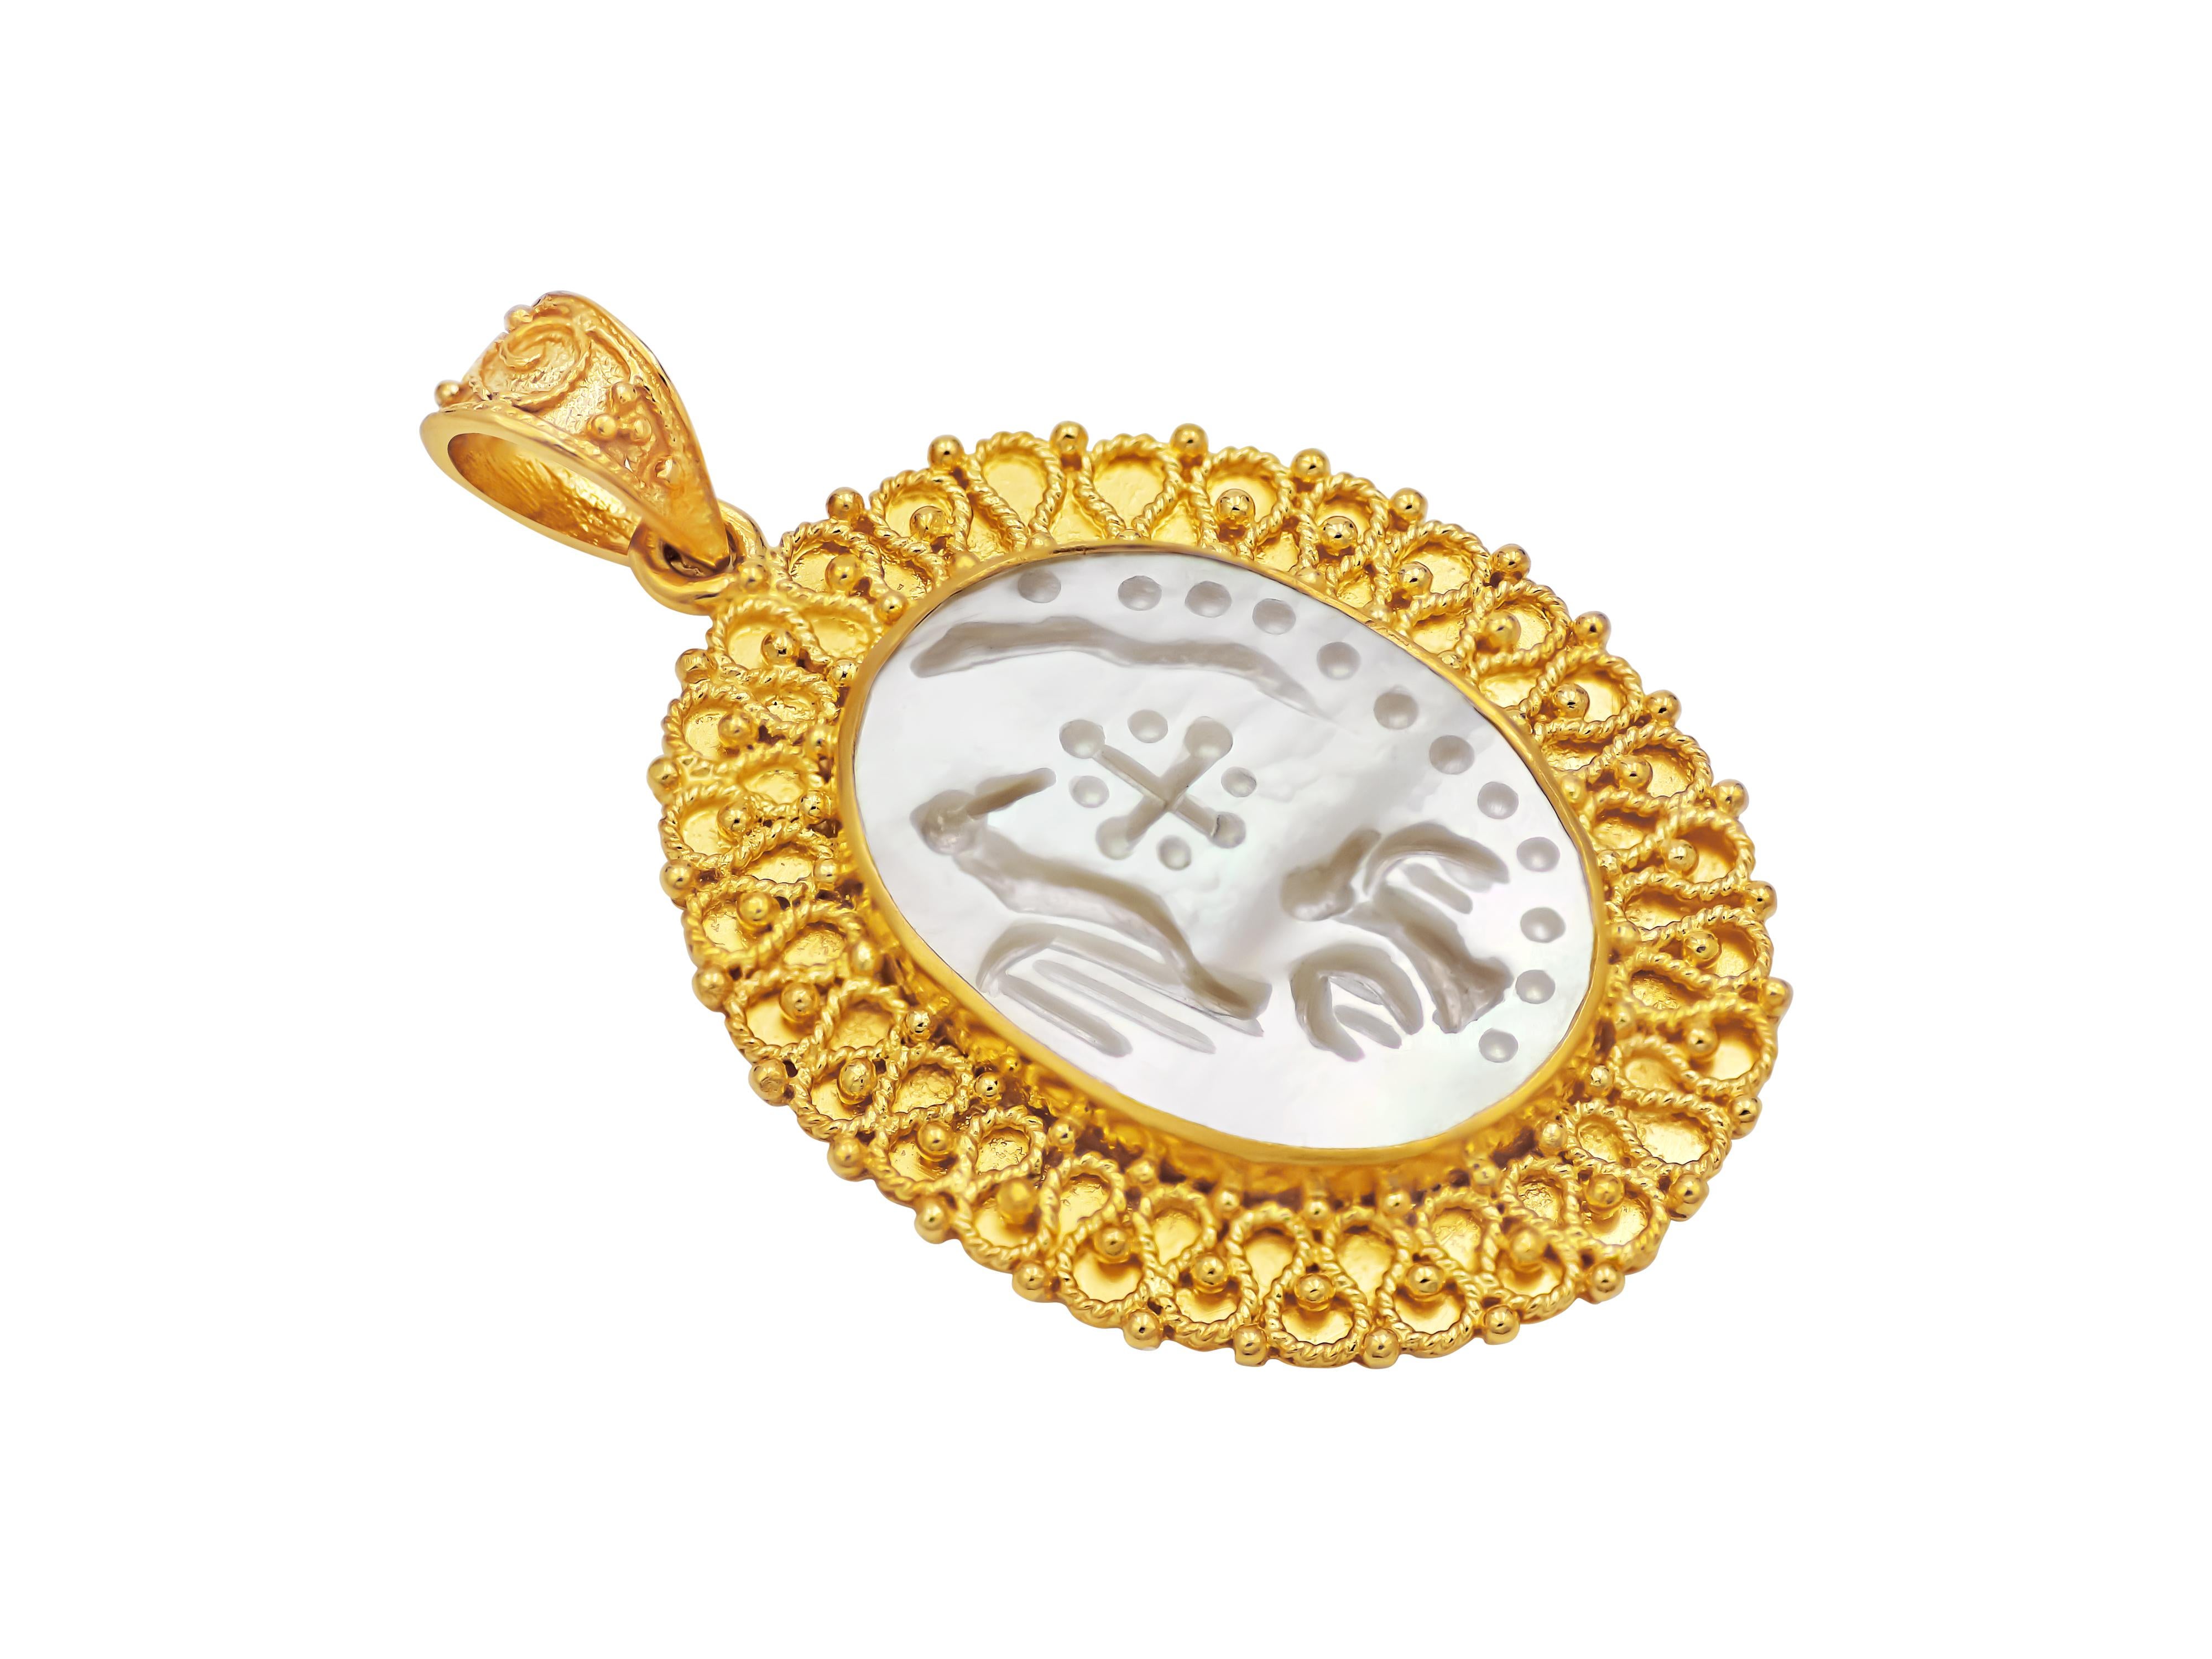 Pendant with mother of pearl in 18 karat yellow gold and carved with a museum inspired theme of Doves. An incredible framing of filigrees and granulation gives it character and dimension.